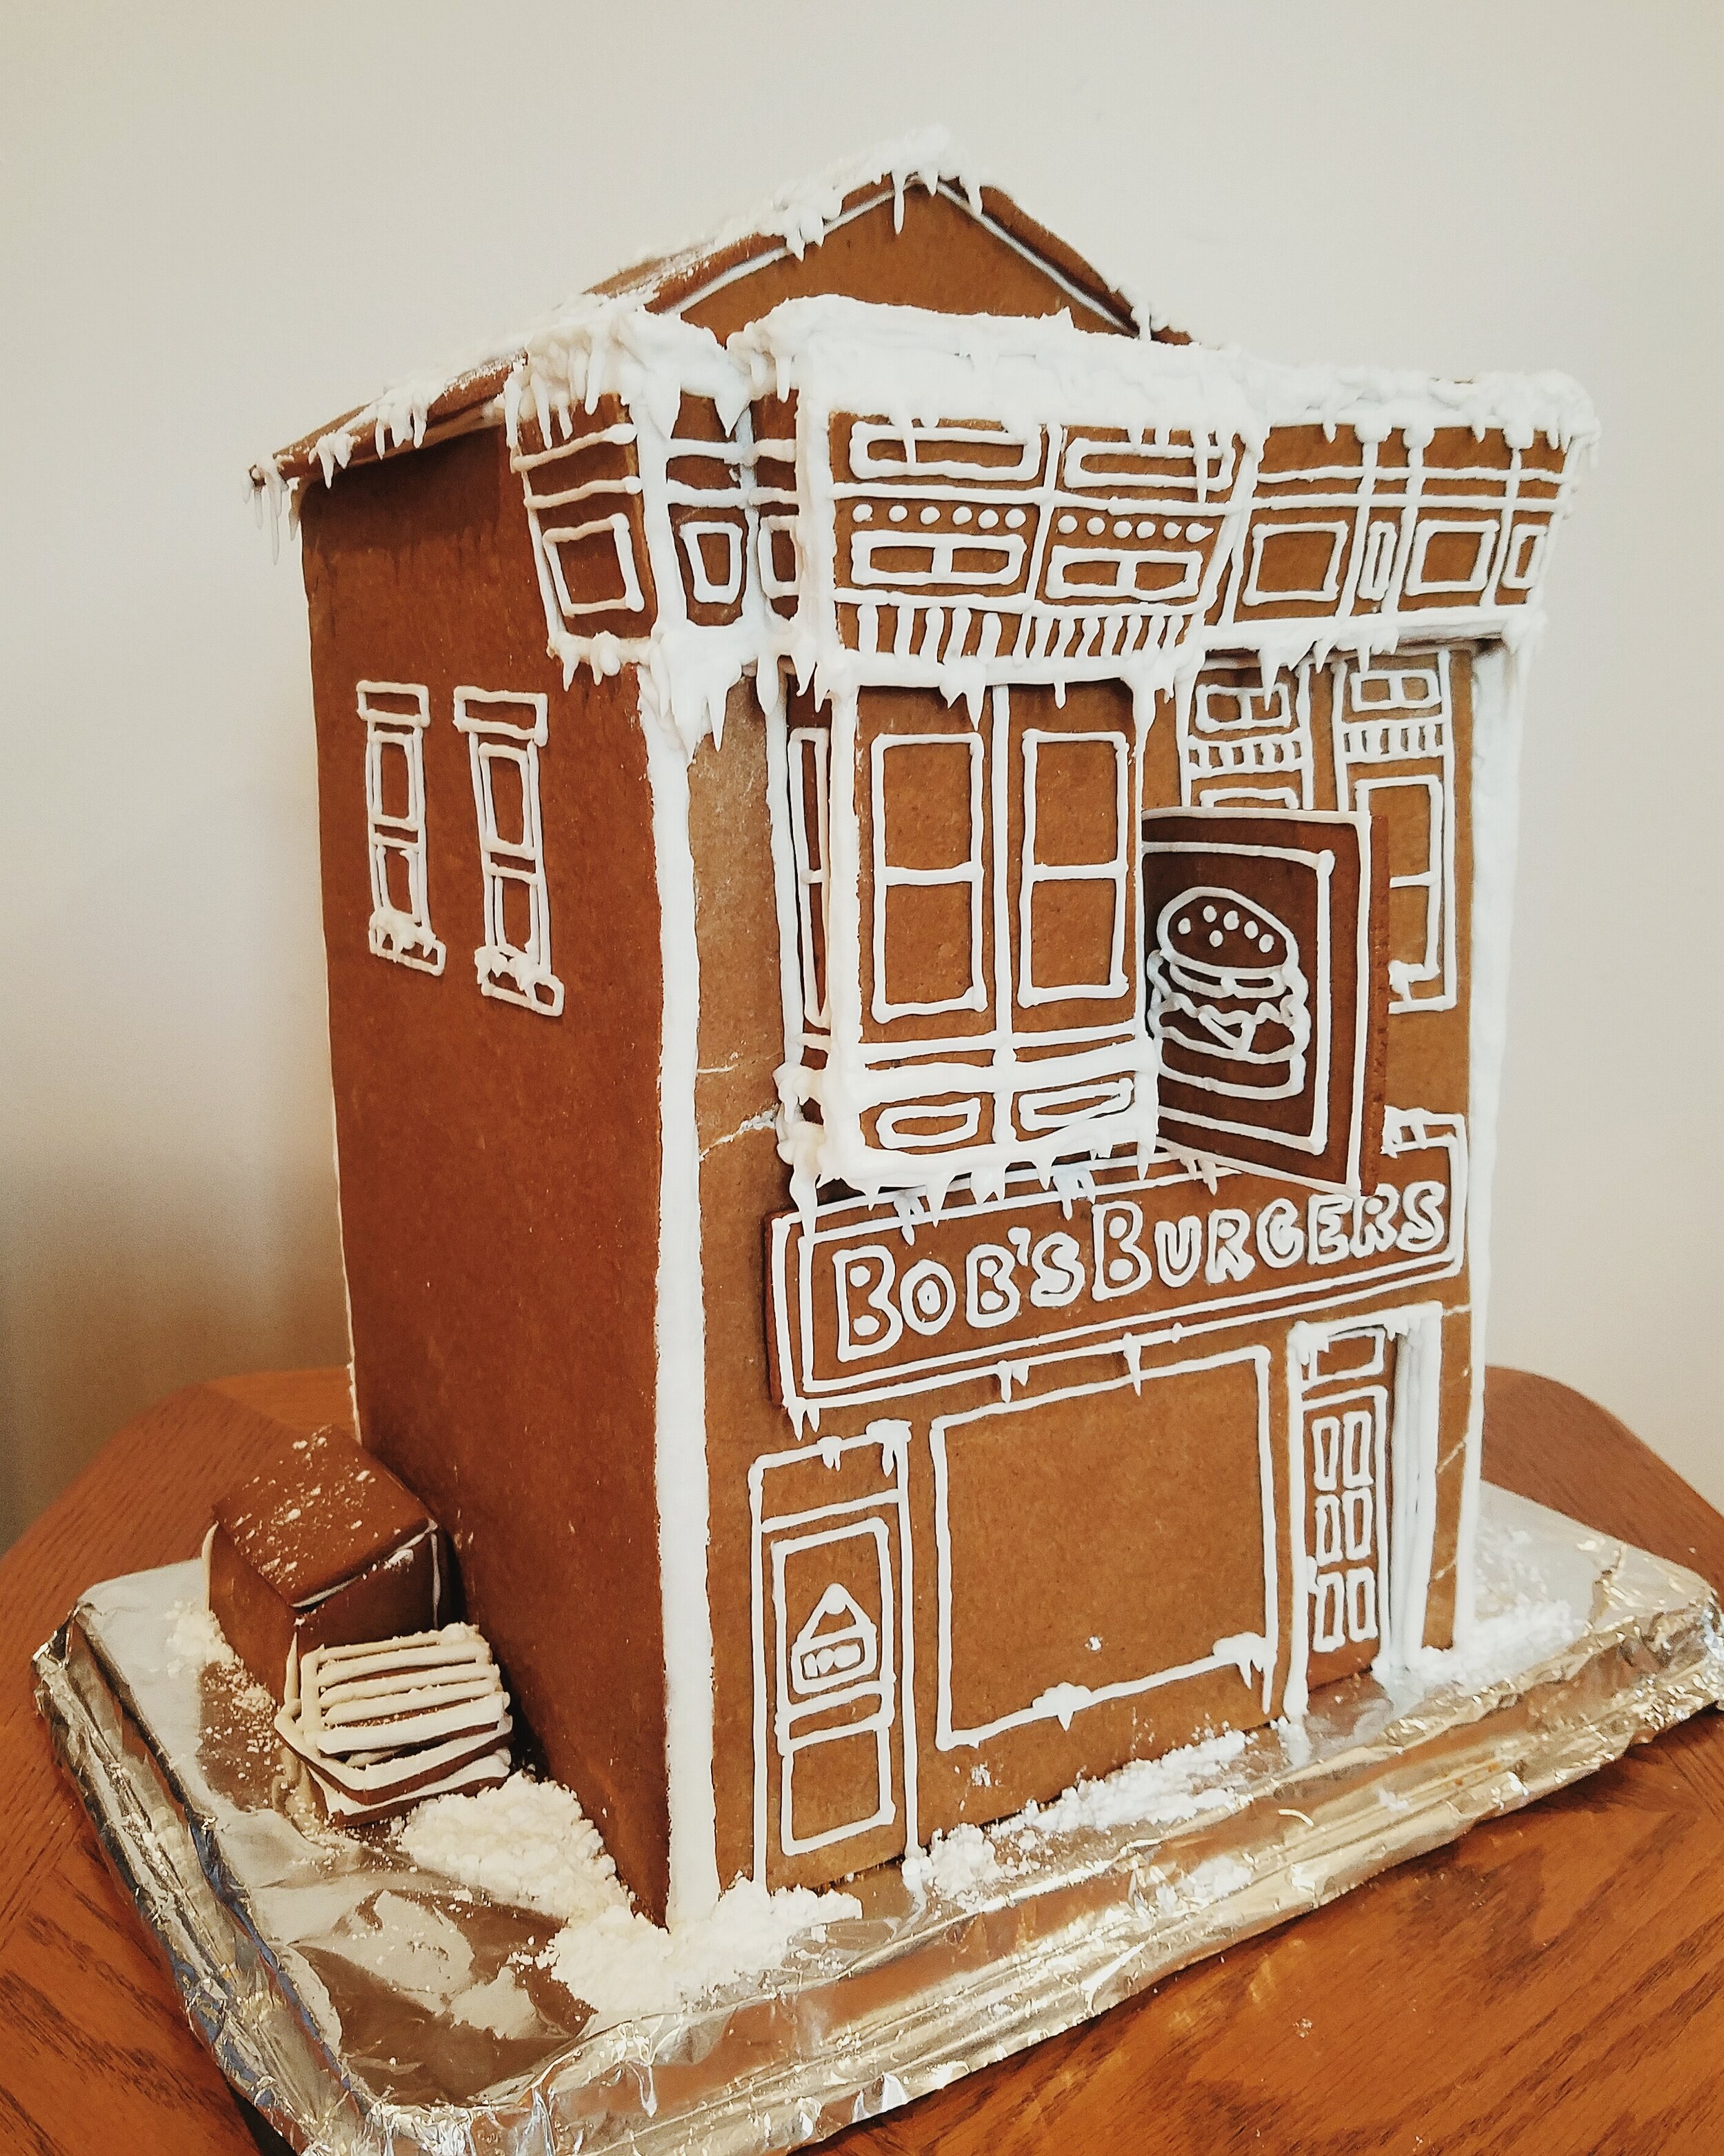  ( 2017 ) Bob’s Burgers in gingerbread house form! 